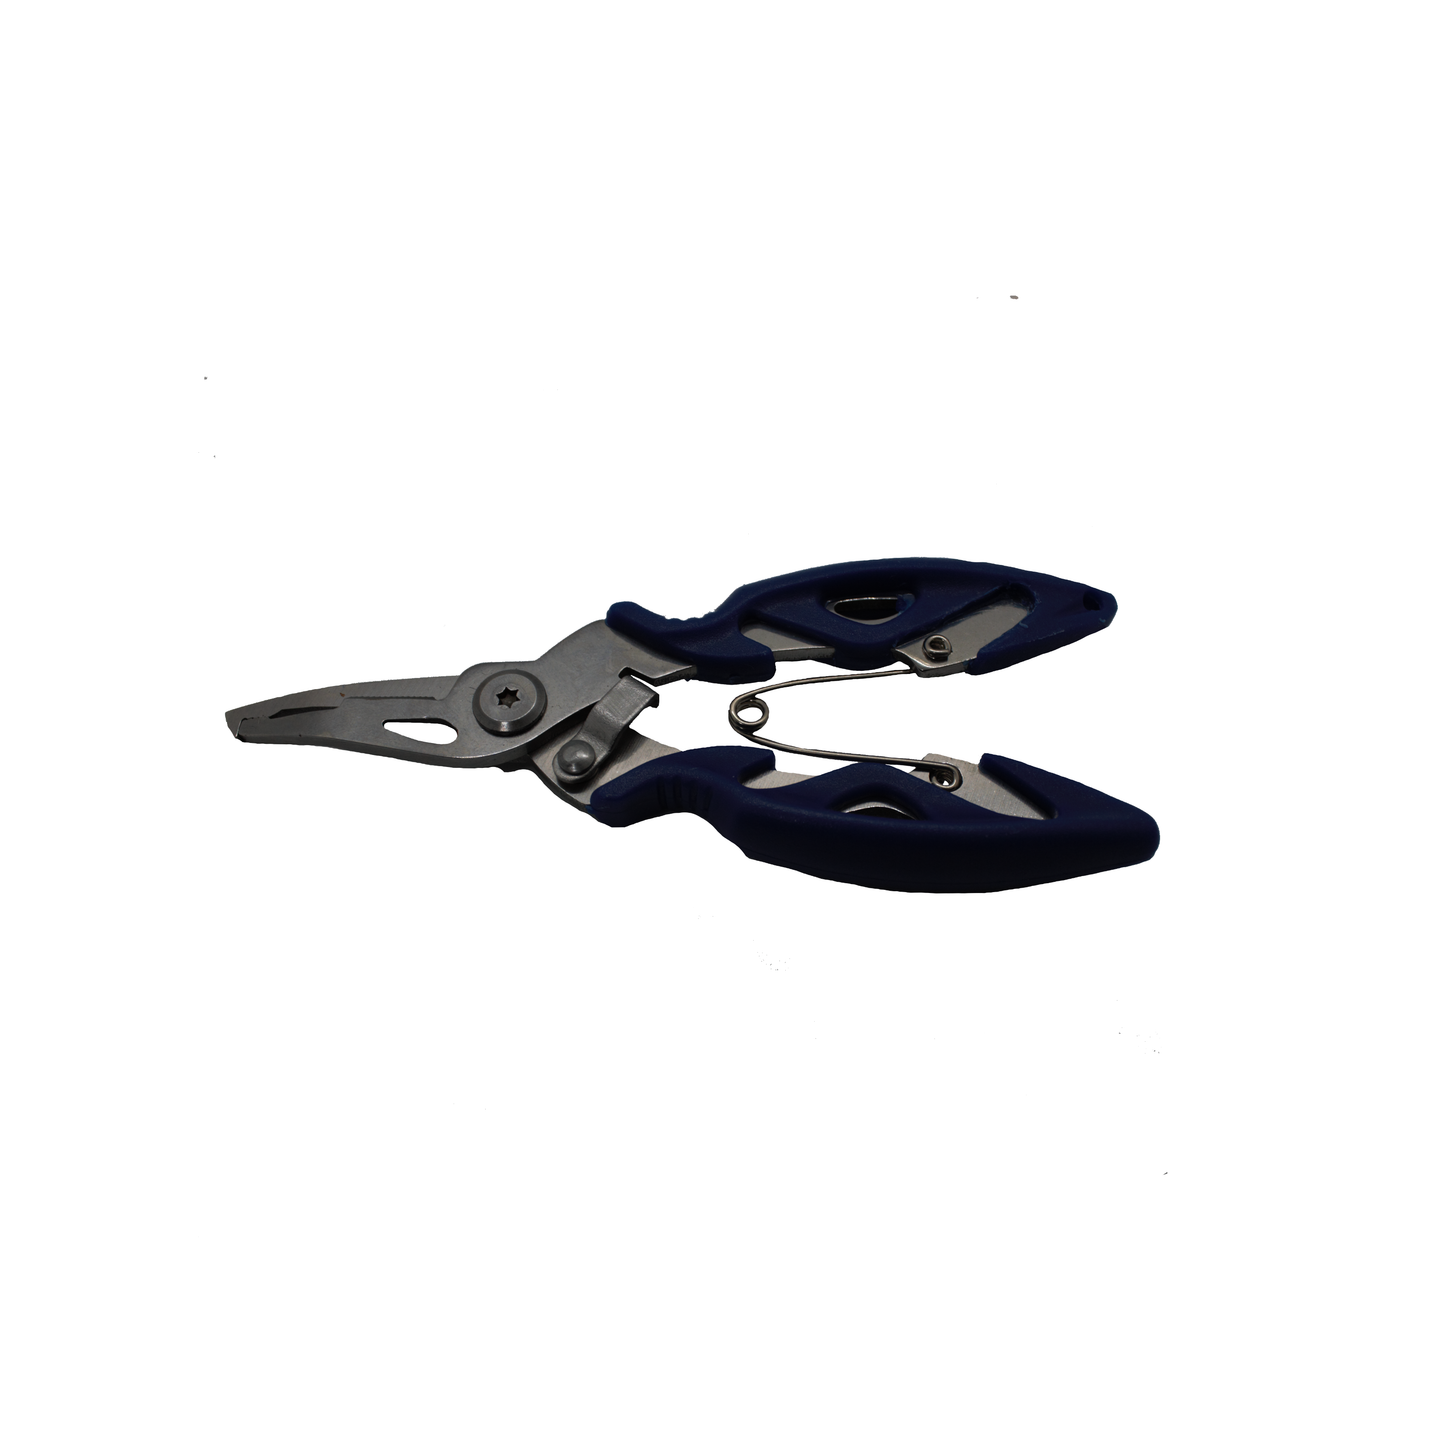  FOSTAR Fishing Pliers, Stainless Steel Hook Remover